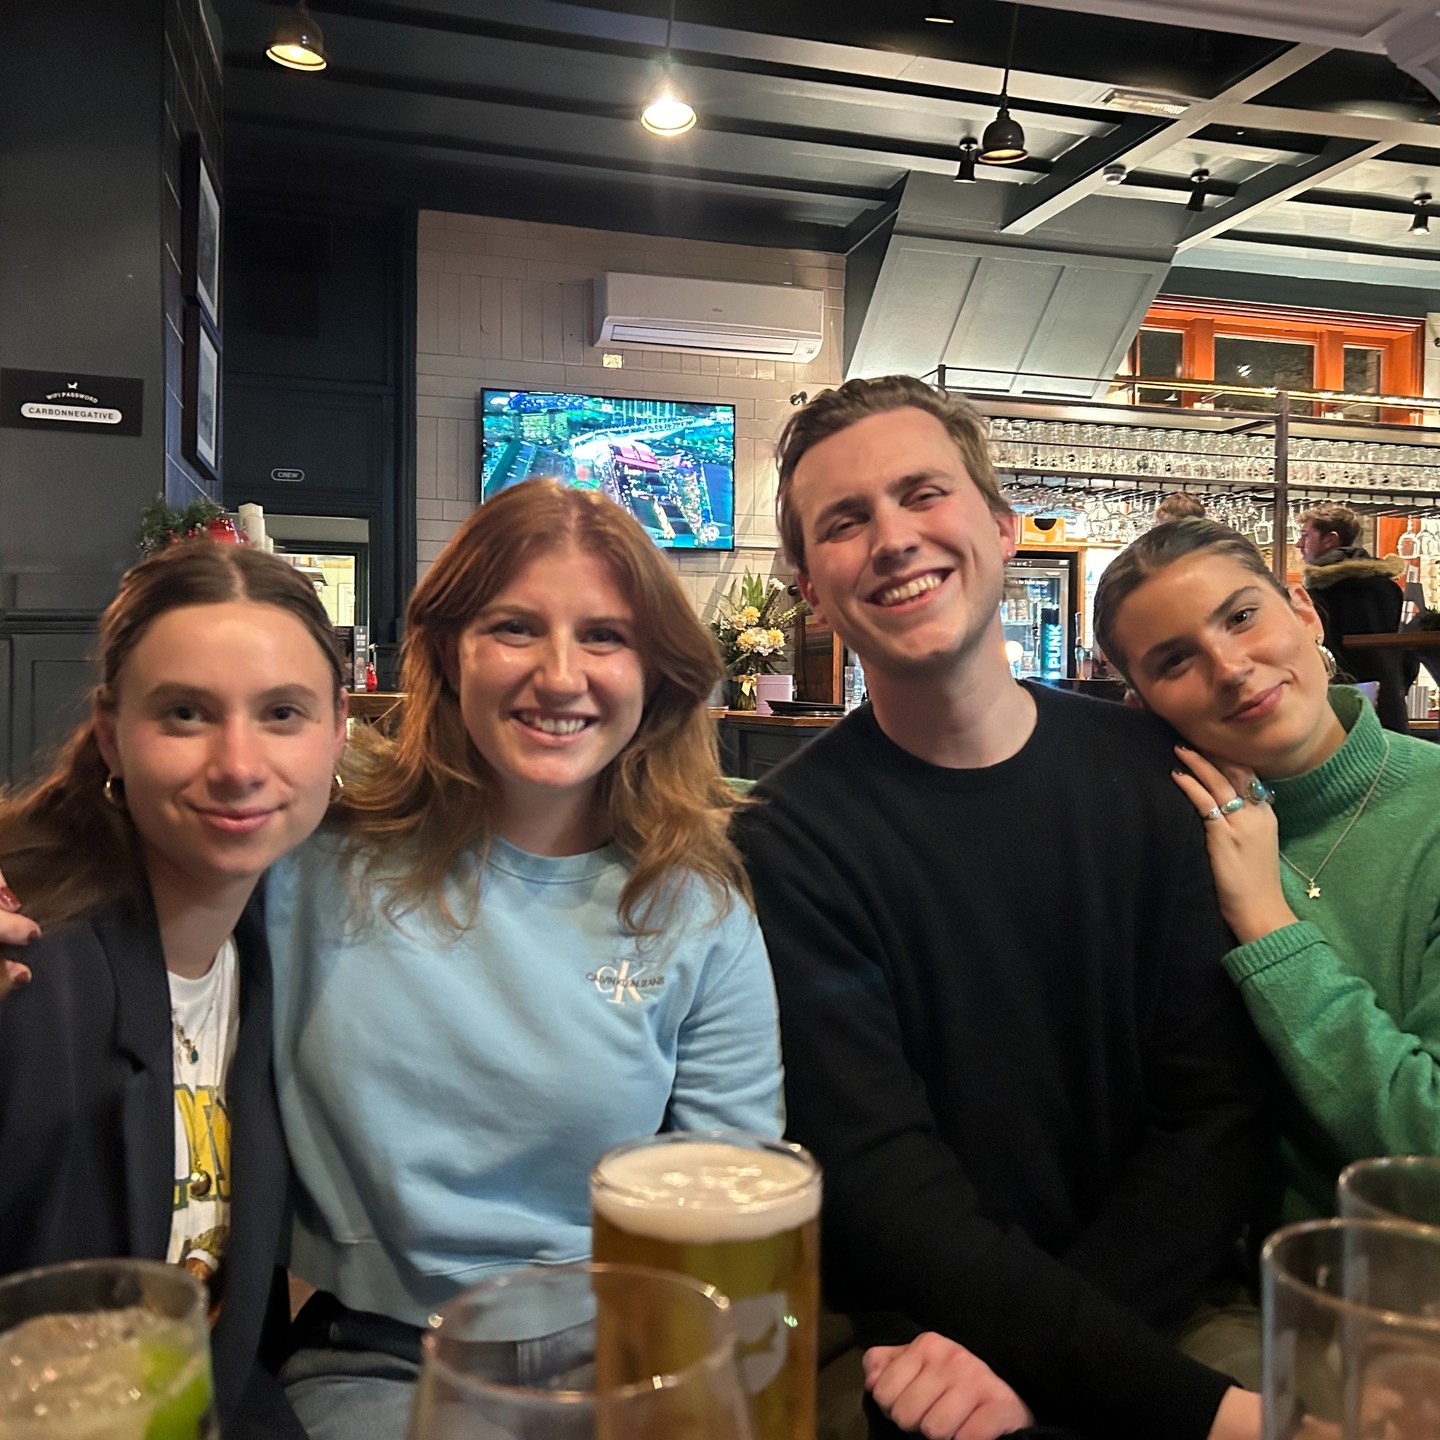 Some of the Positive team enjoying a beer and great company! 🙌

Cheers to the best team! 🍻

#team #positivepr #pragency #hammersmith #b2btech #techpr #b2btechpr